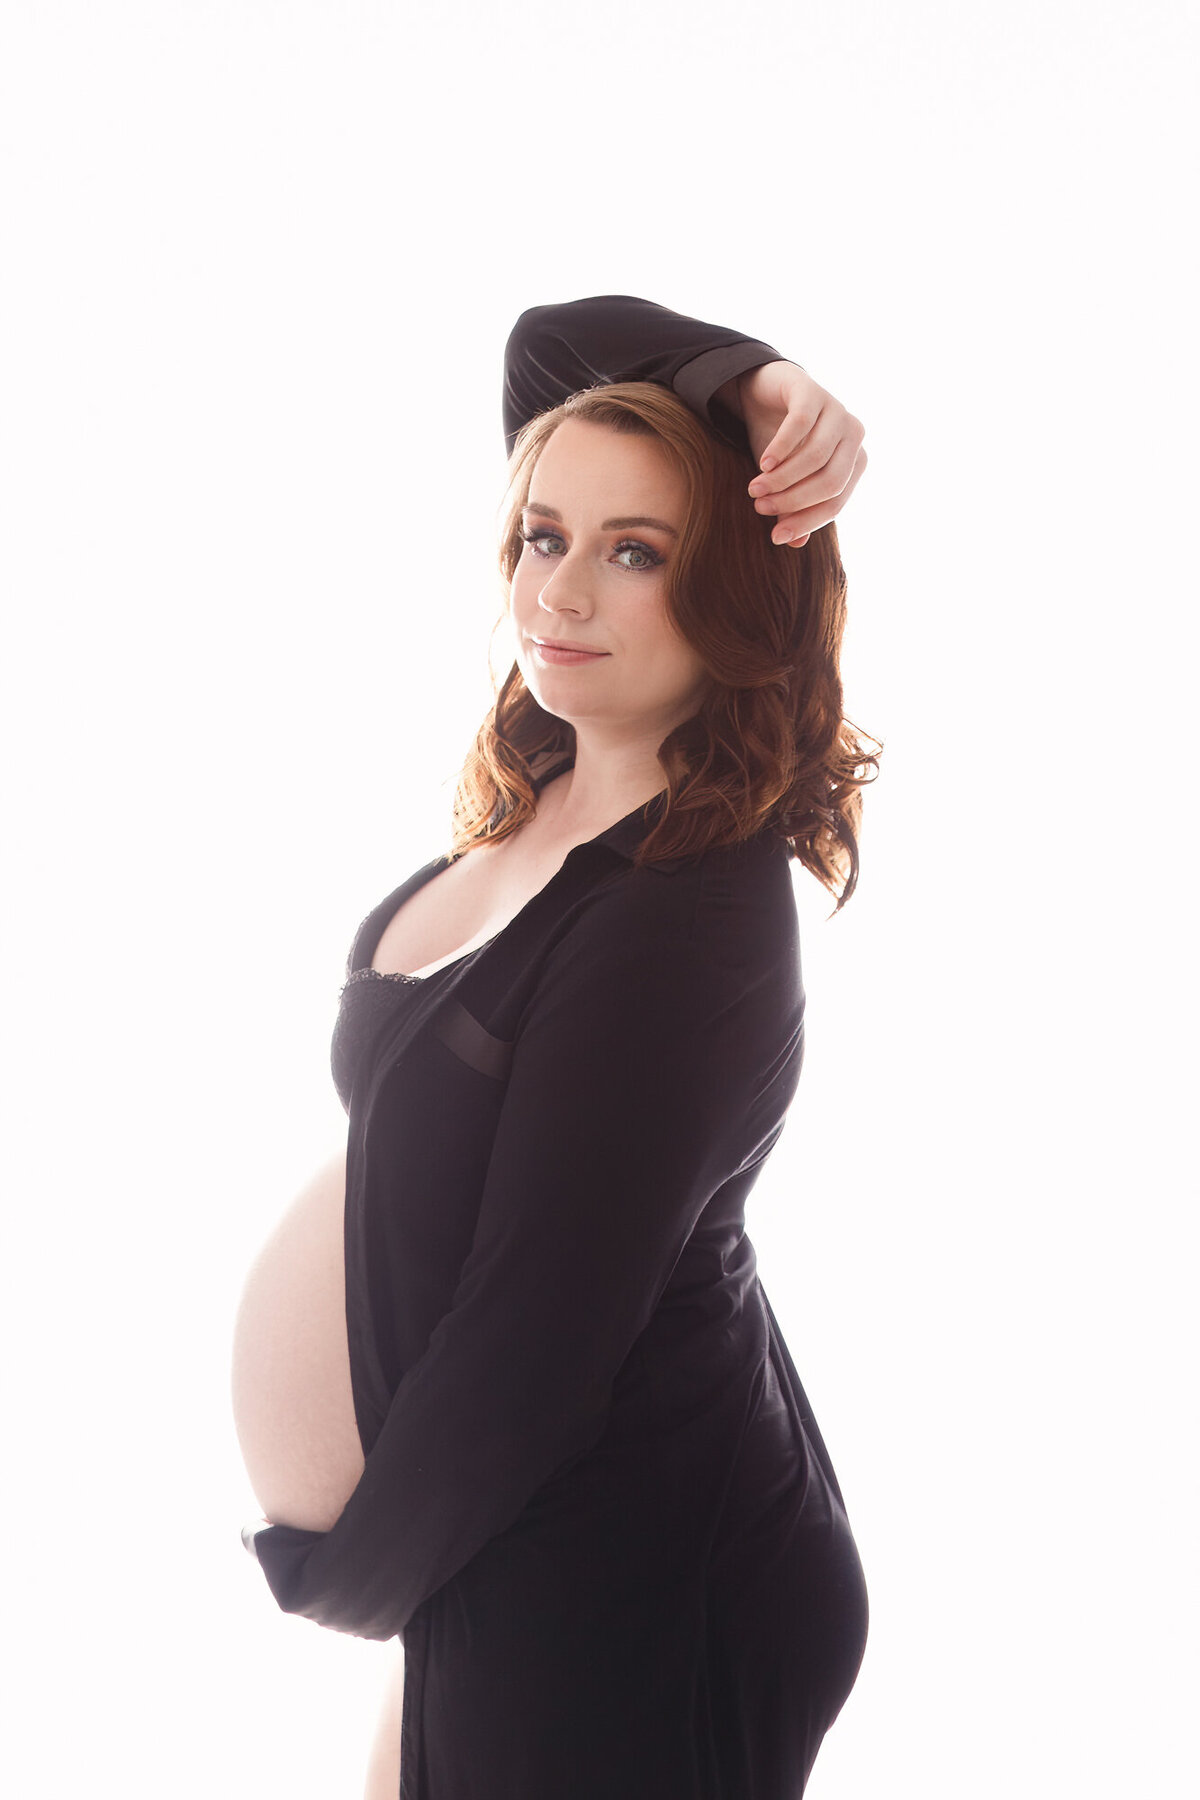 Pregnant woman wearing a black shirt photographed on a white background